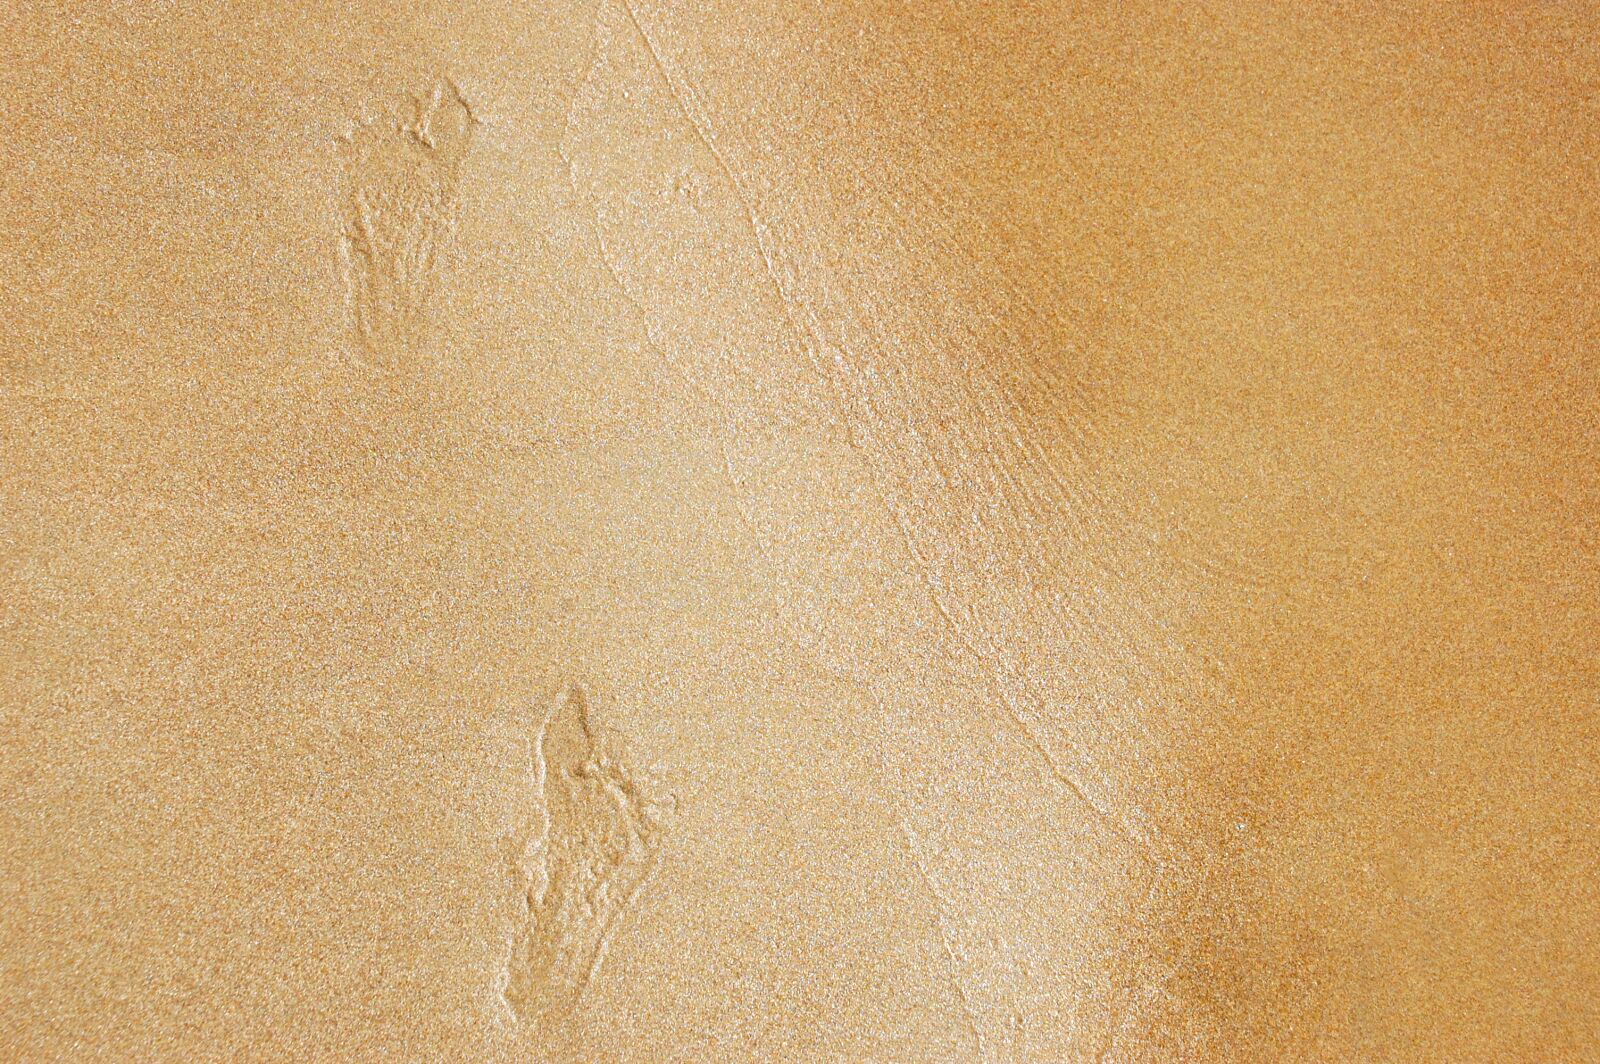 Tamron AF 18-270mm F3.5-6.3 Di II VC LD Aspherical (IF) MACRO sample photo. Footprints in the sand photography